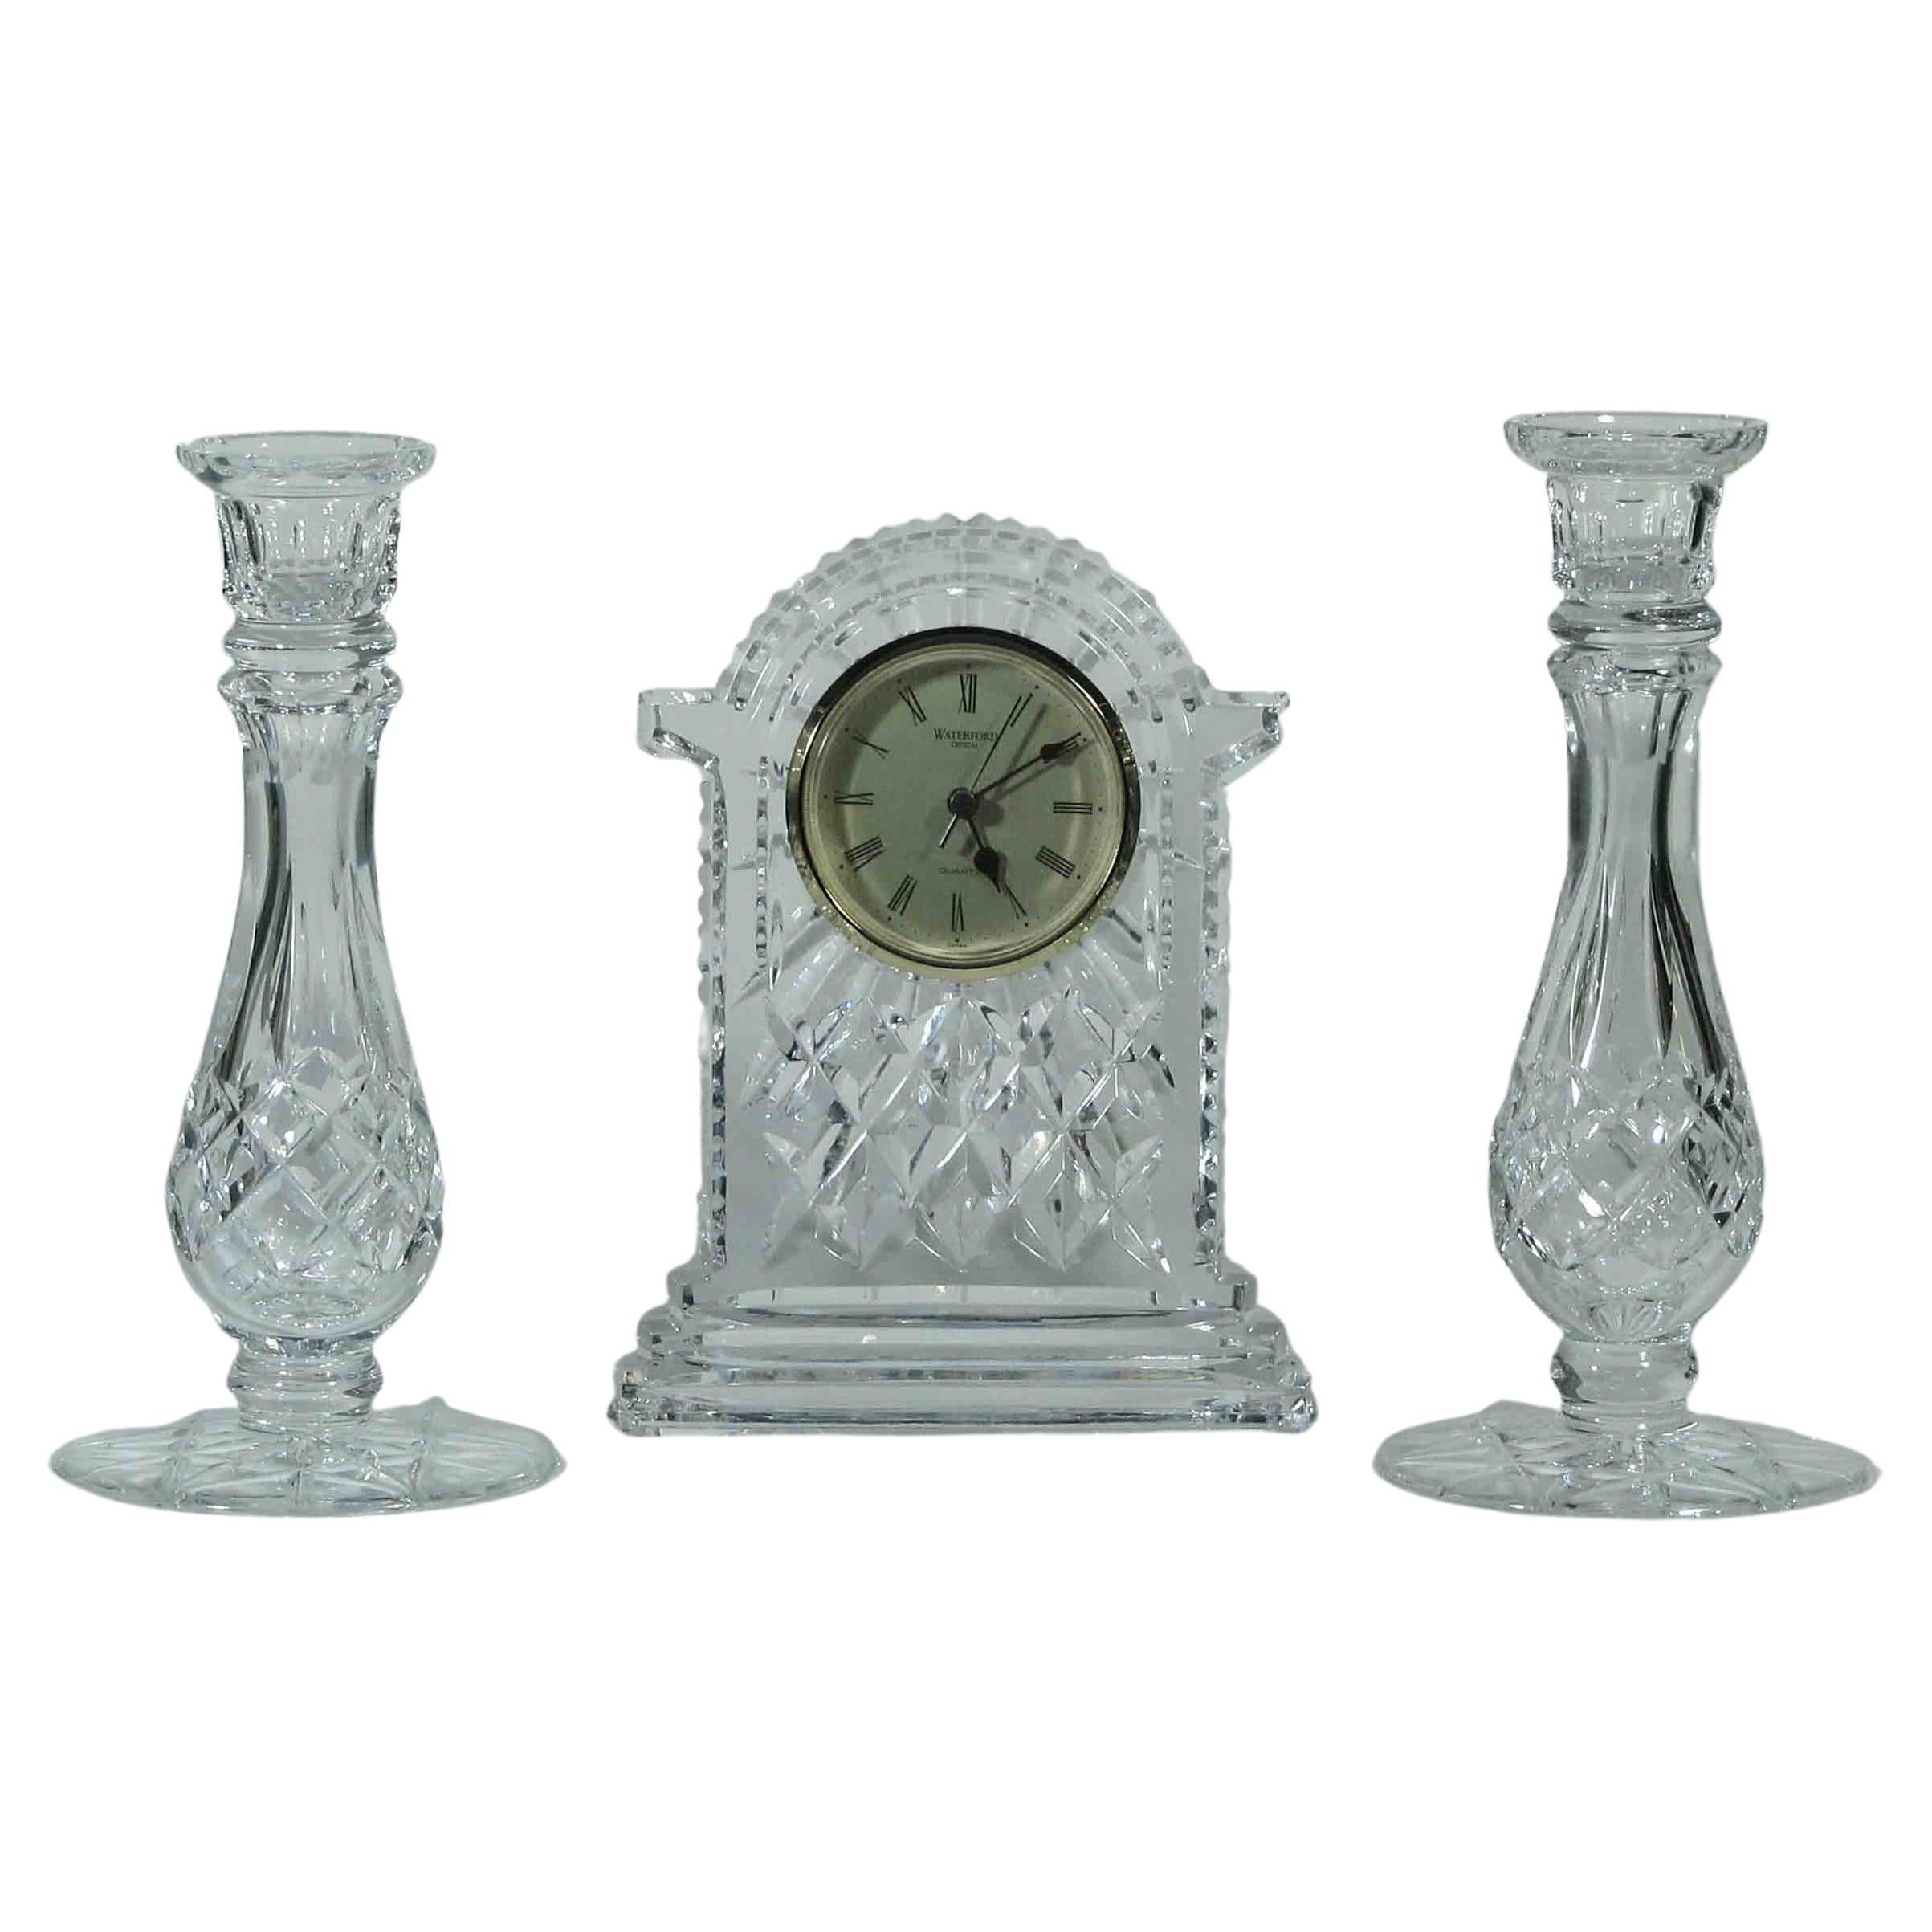 Waterford Cut Glass Mantle Clock and Garniture